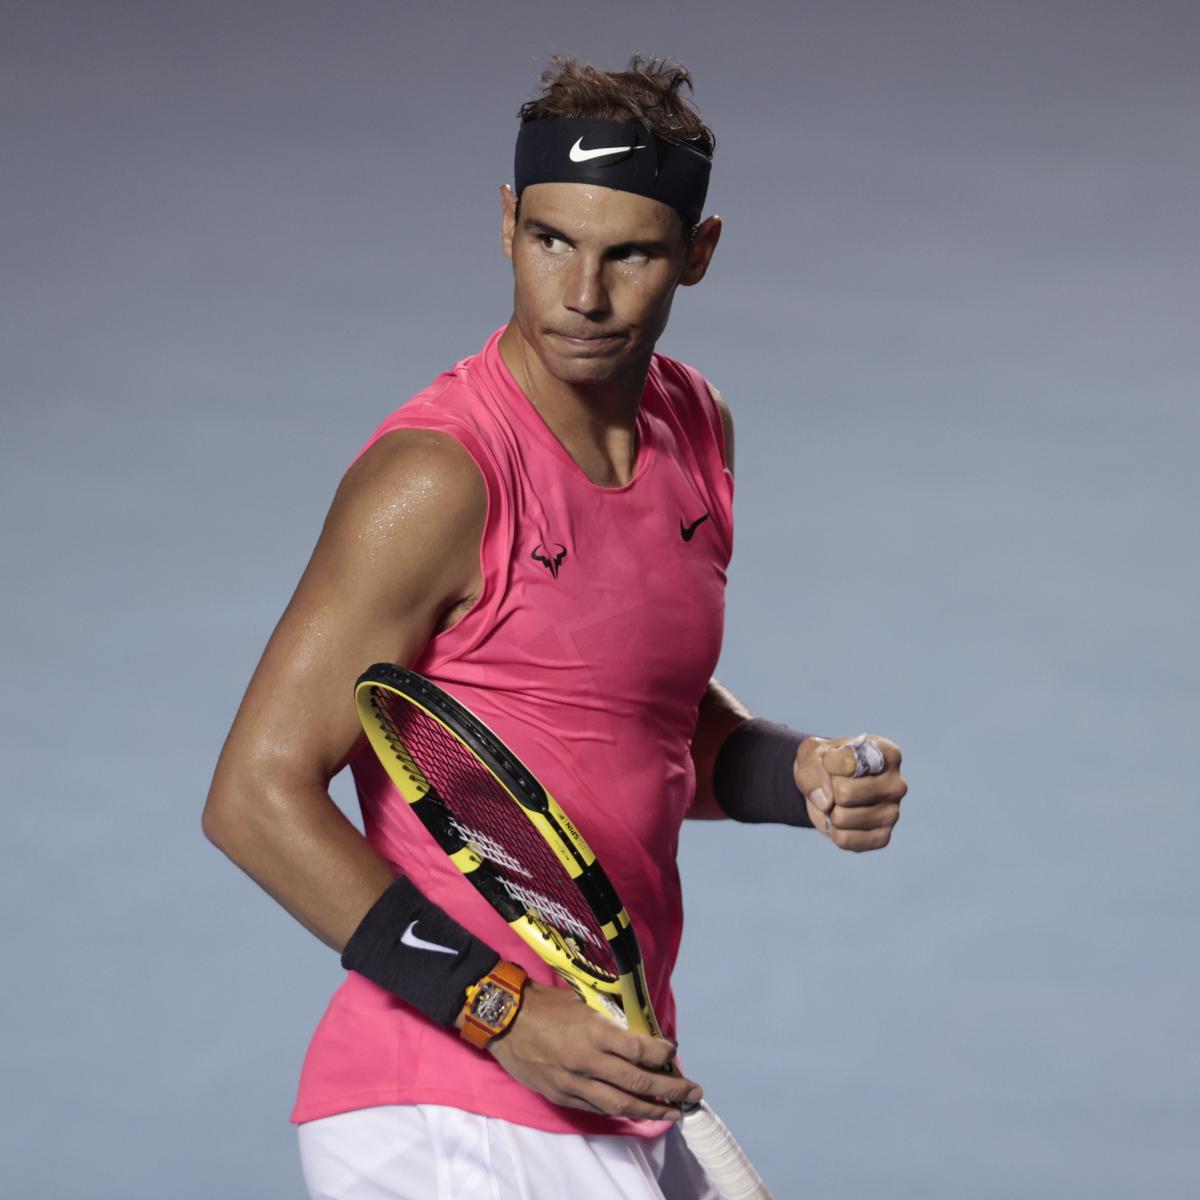 Rafael Nadal Broadcasts He Will No longer Play in 2020 US Open amid COVID-19 Concerns